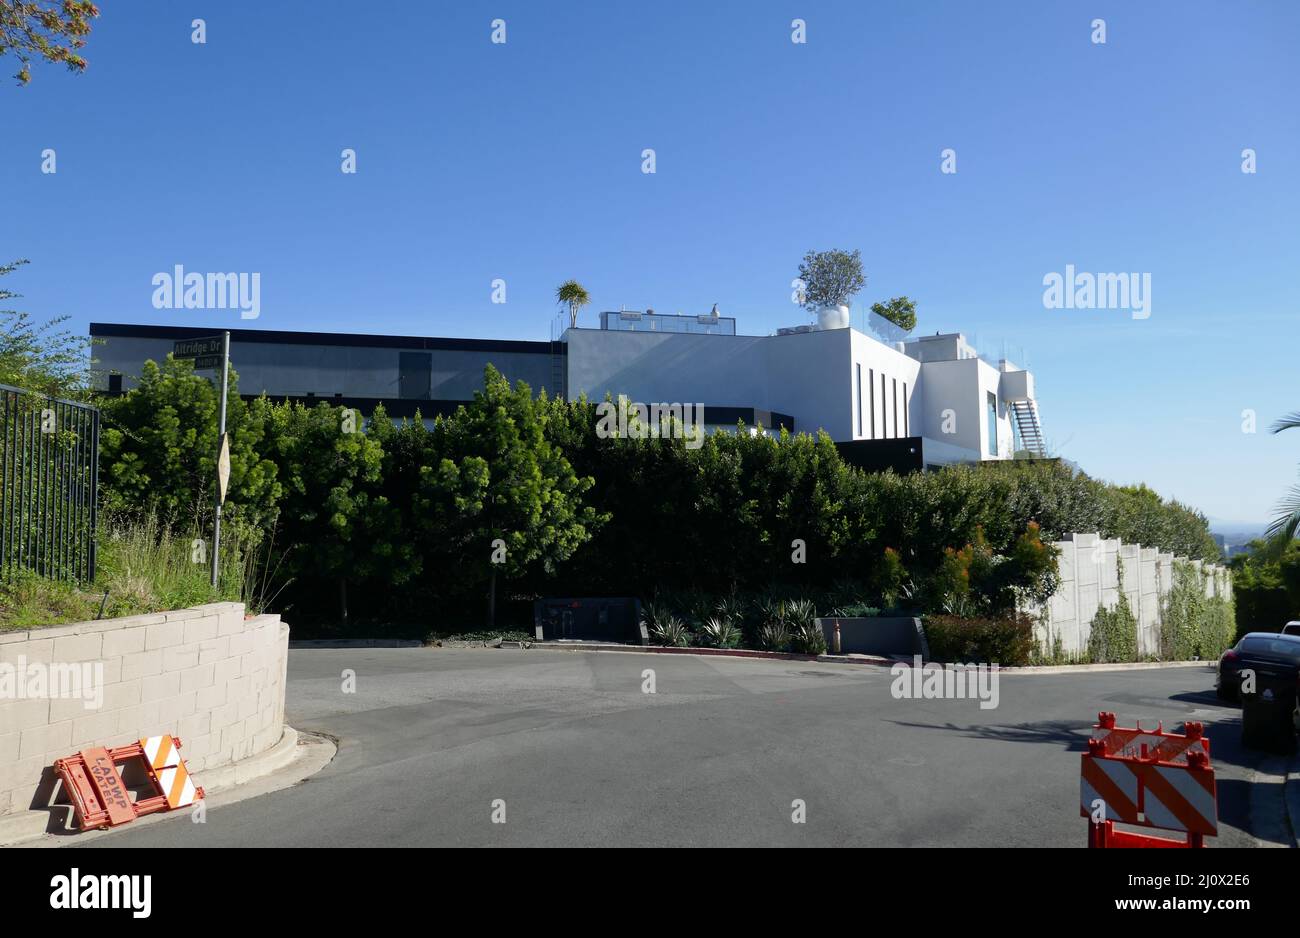 Beverly Hills, California, USA 12th March 2022 Actor Gregory Peck, Actor Boris Karloff and Actress Elizabeth Ashley's Former Home/House at 1426 Summitridge Drive on March 12, 2022 in Beverly Hills, California, USA. Photo by Barry King/Alamy Stock Photo Stock Photo